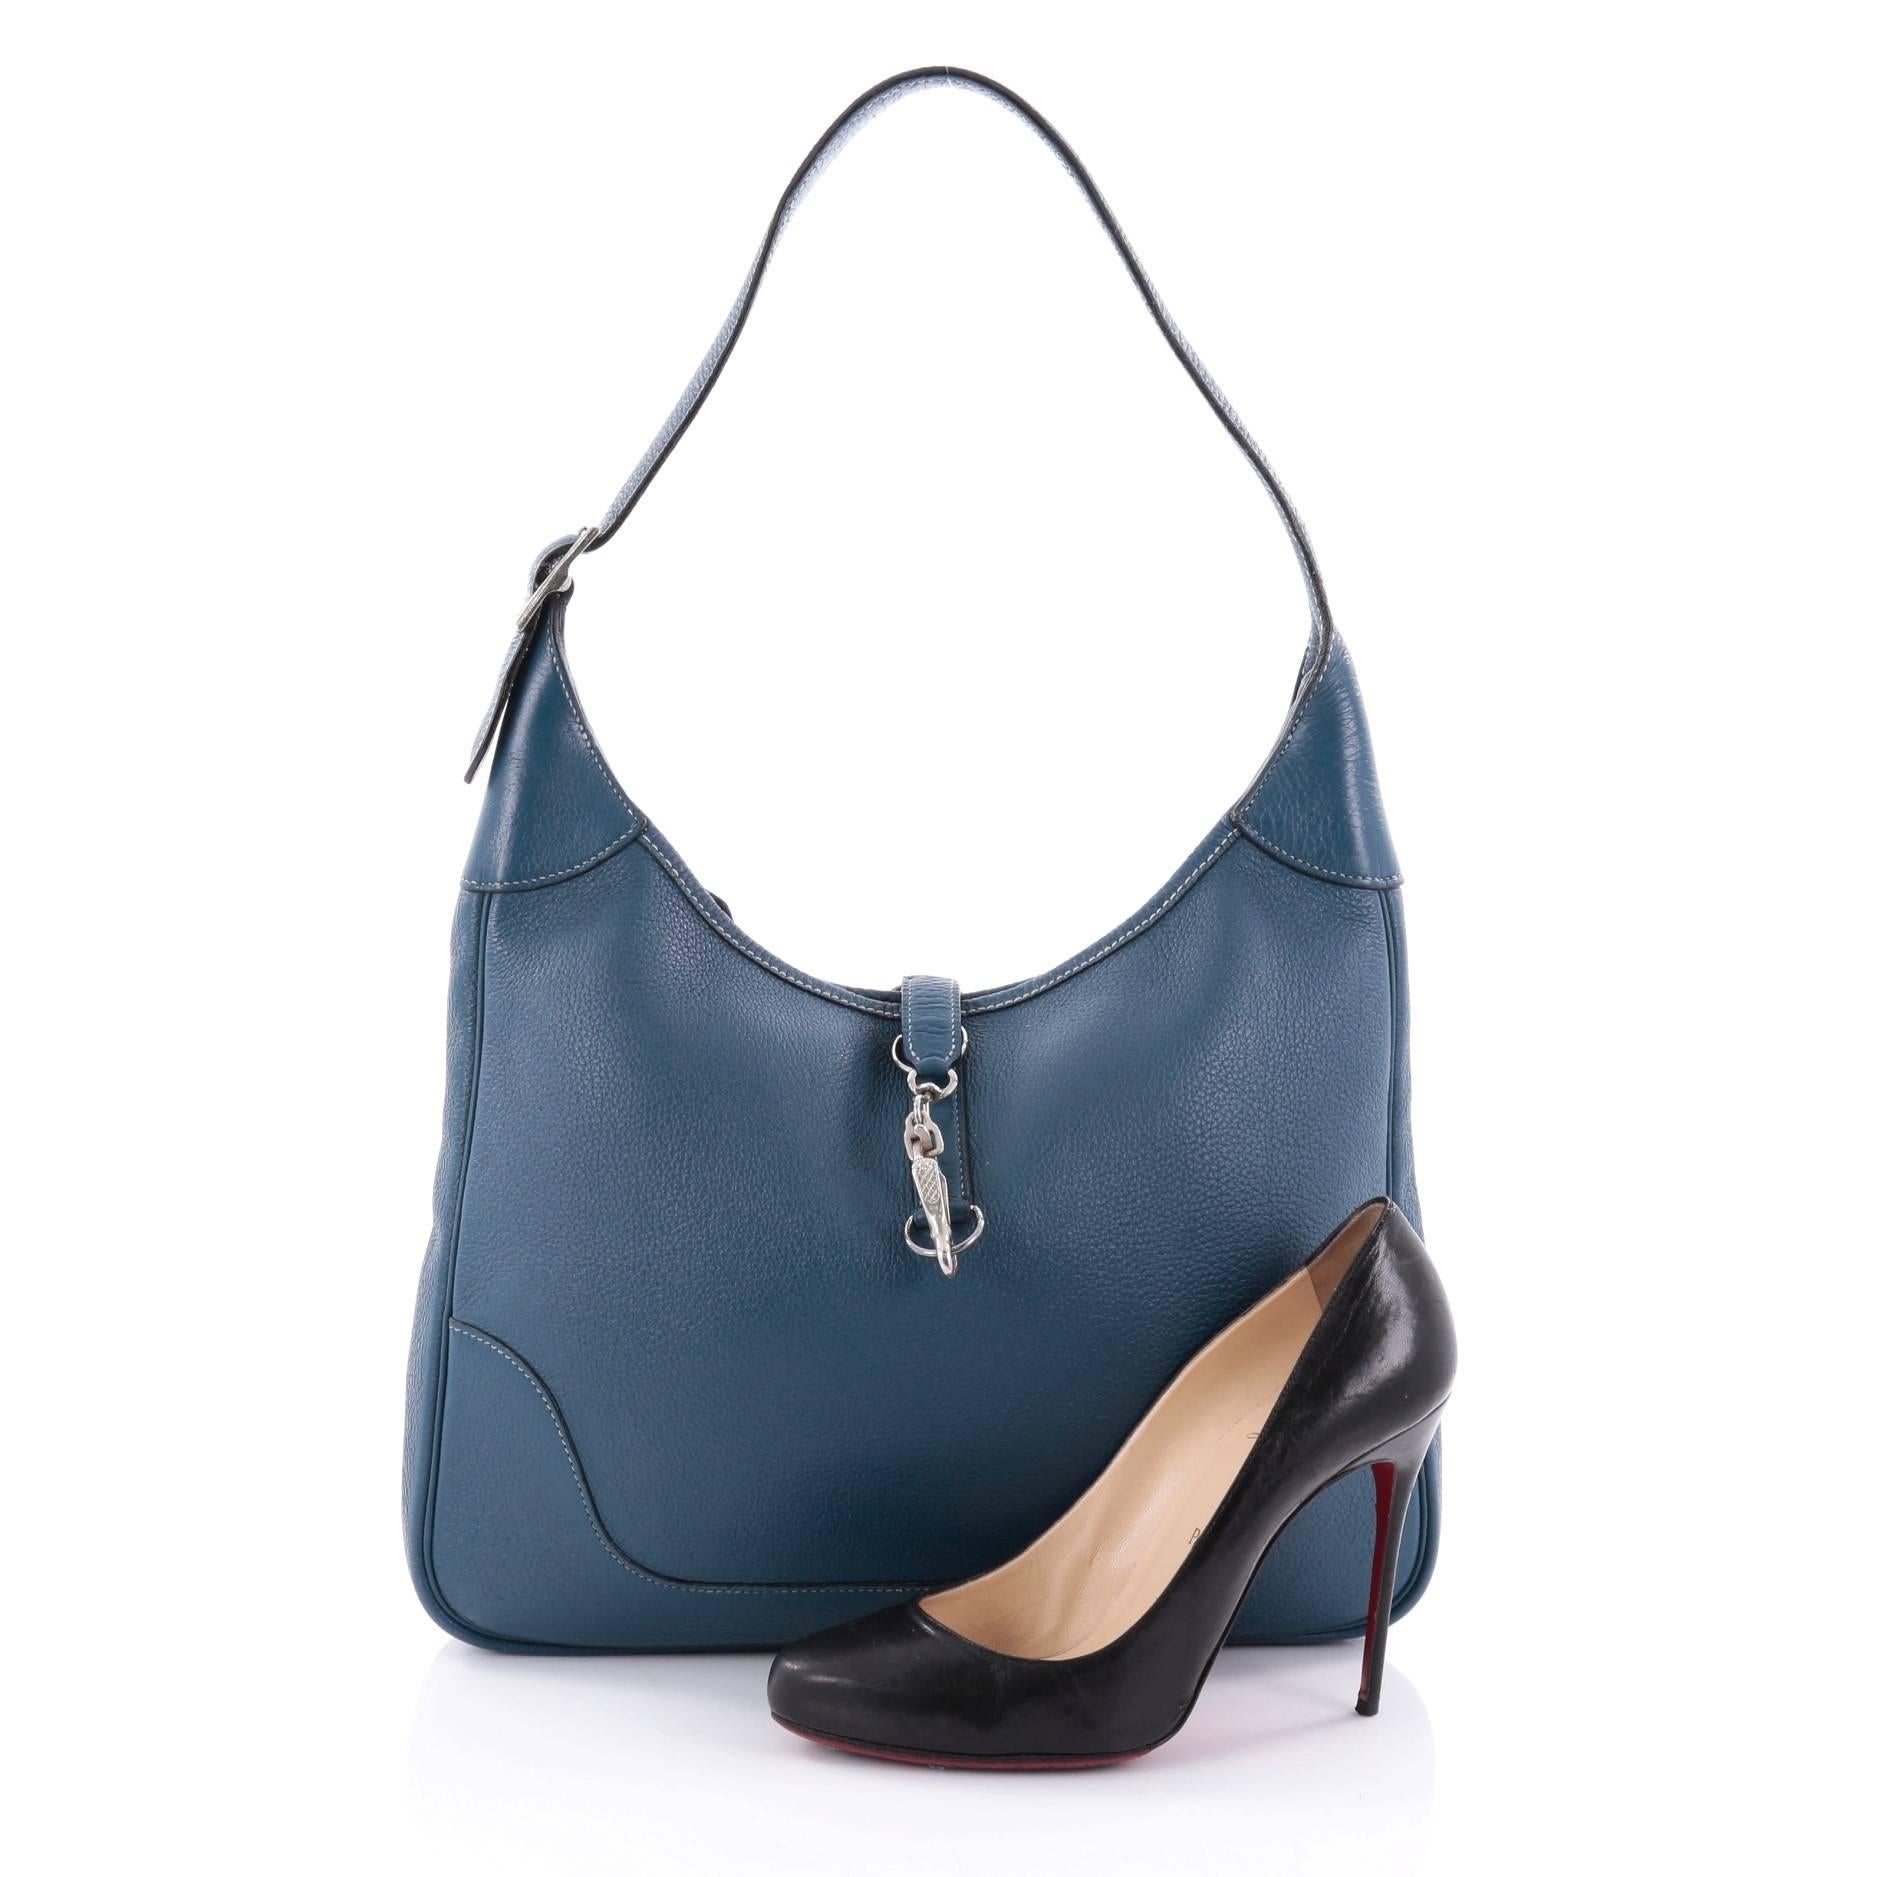 This authentic Hermes Trim II Handbag Togo 35 is a luxurious and stylish shoulder bag. Crafted from bleu thalassa togo leather, this discontinued classic features adjustable shoulder strap, palladium tone frontal clasp and palladium-tone hardware